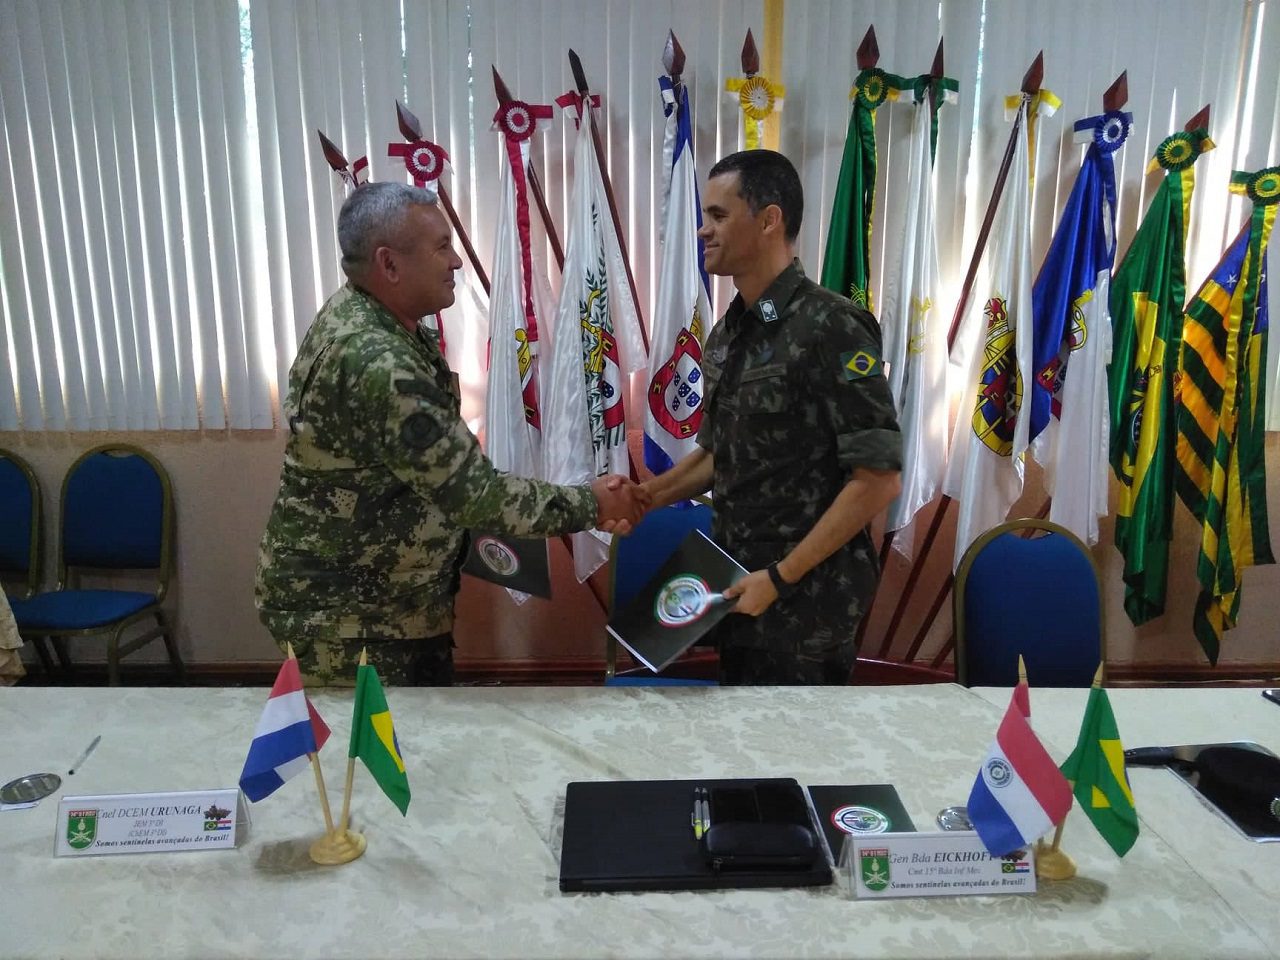 Brazilian Military Cooperation in Paraguay: 80 years of integration and friendship